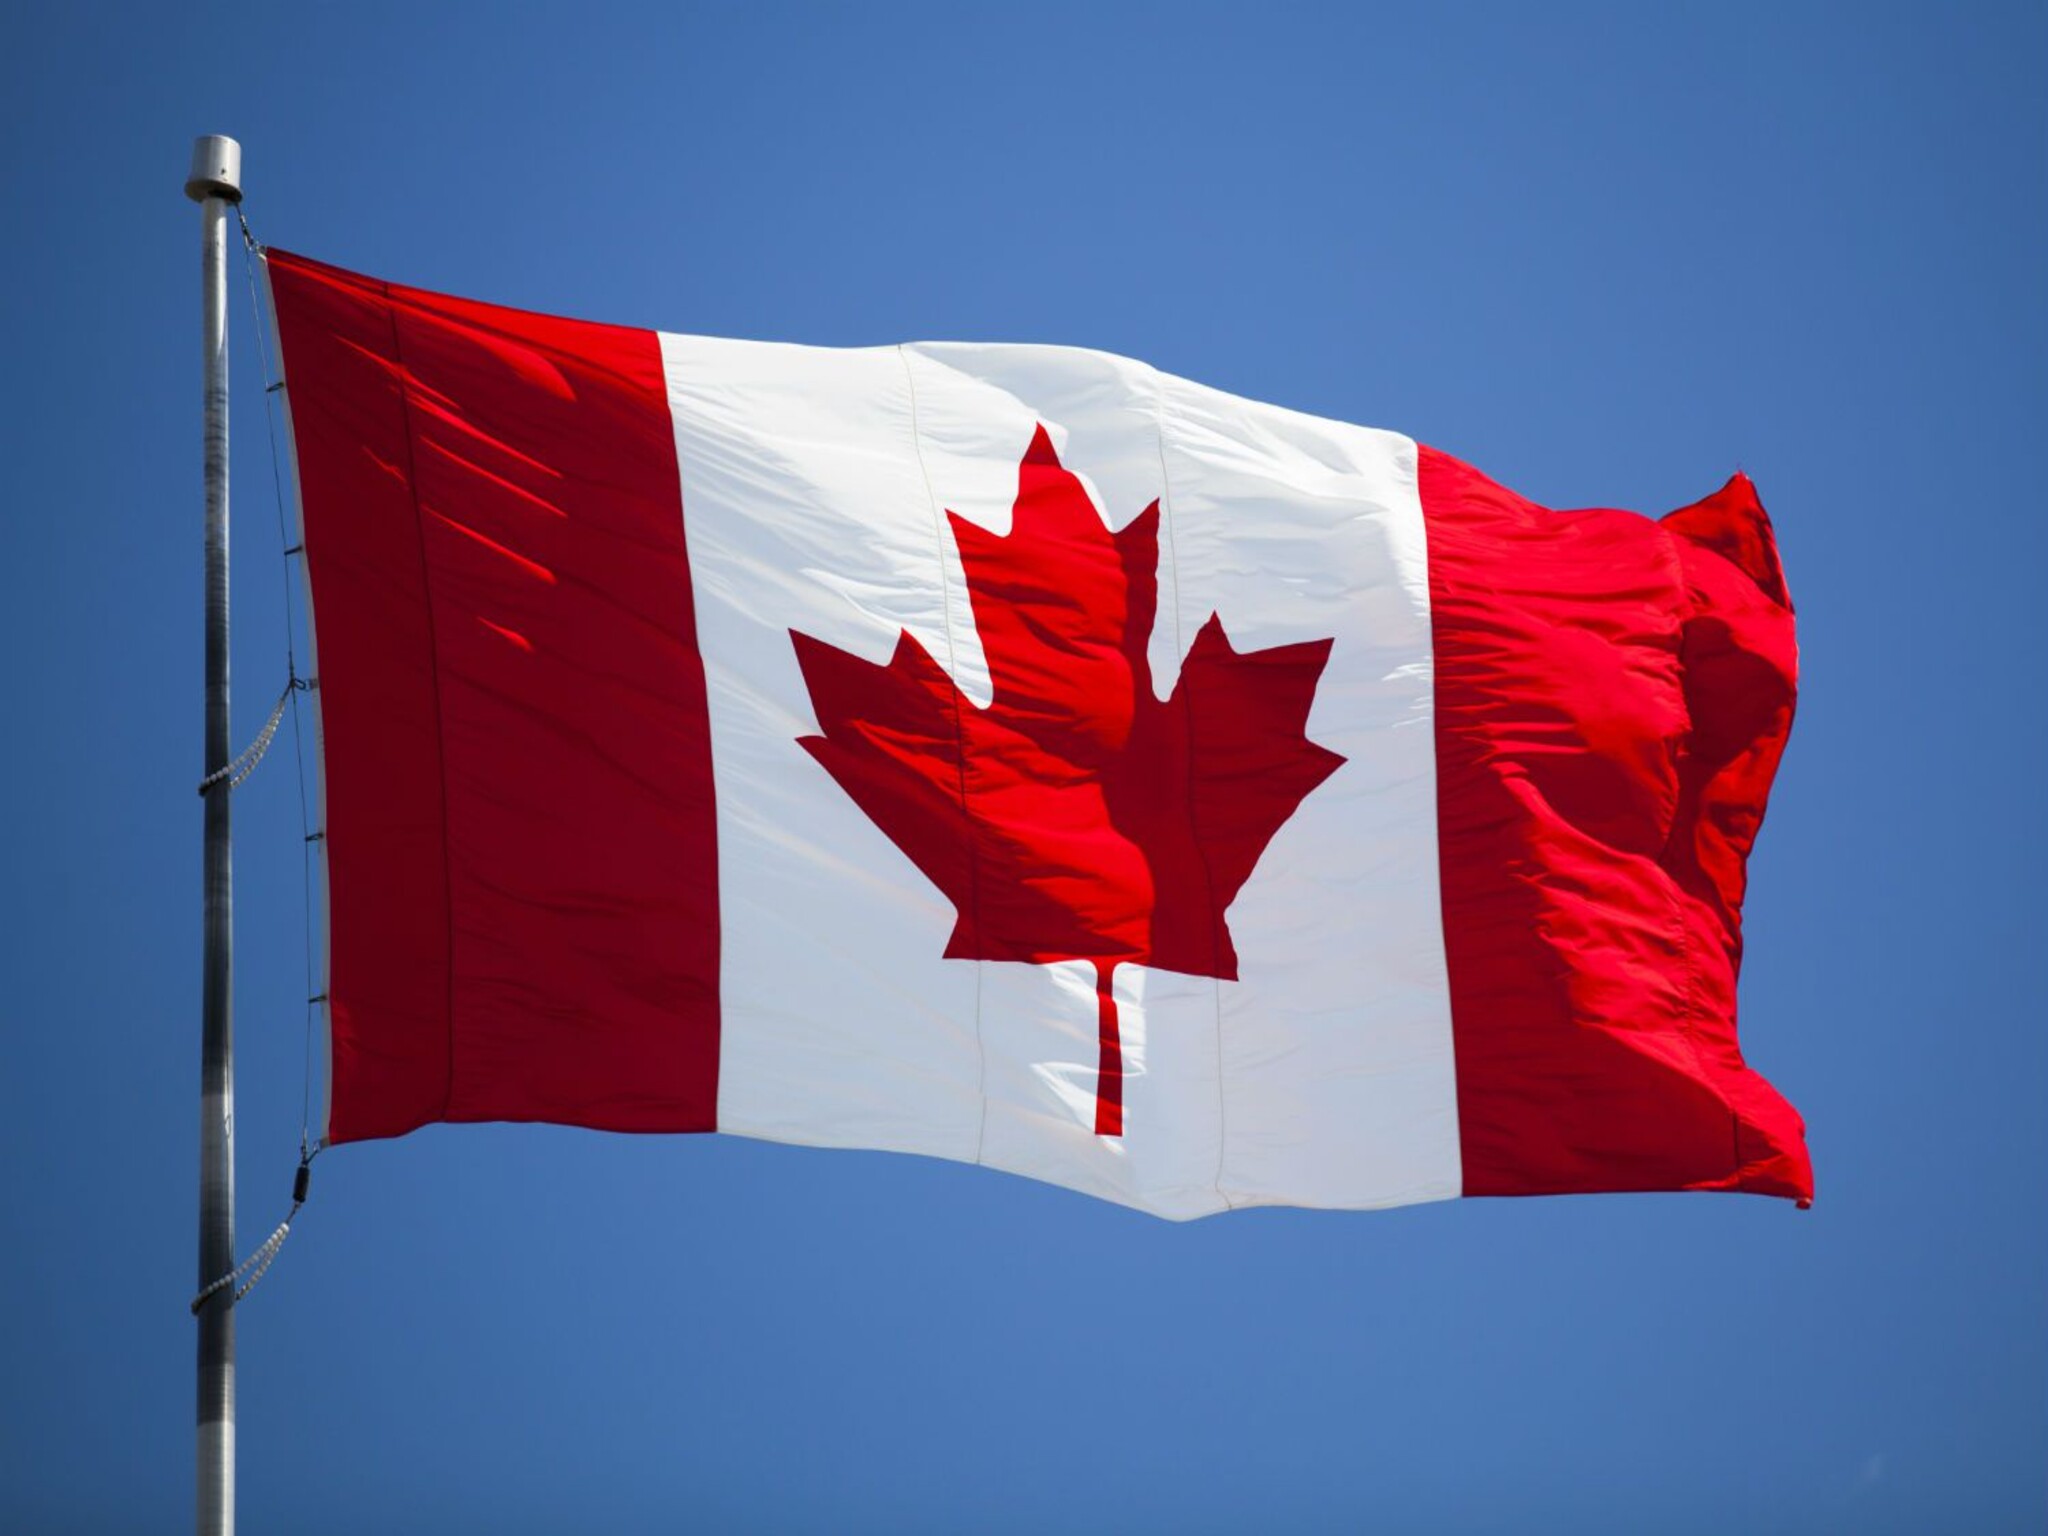 Canada issues a decision to cancel work permit fees for some residents